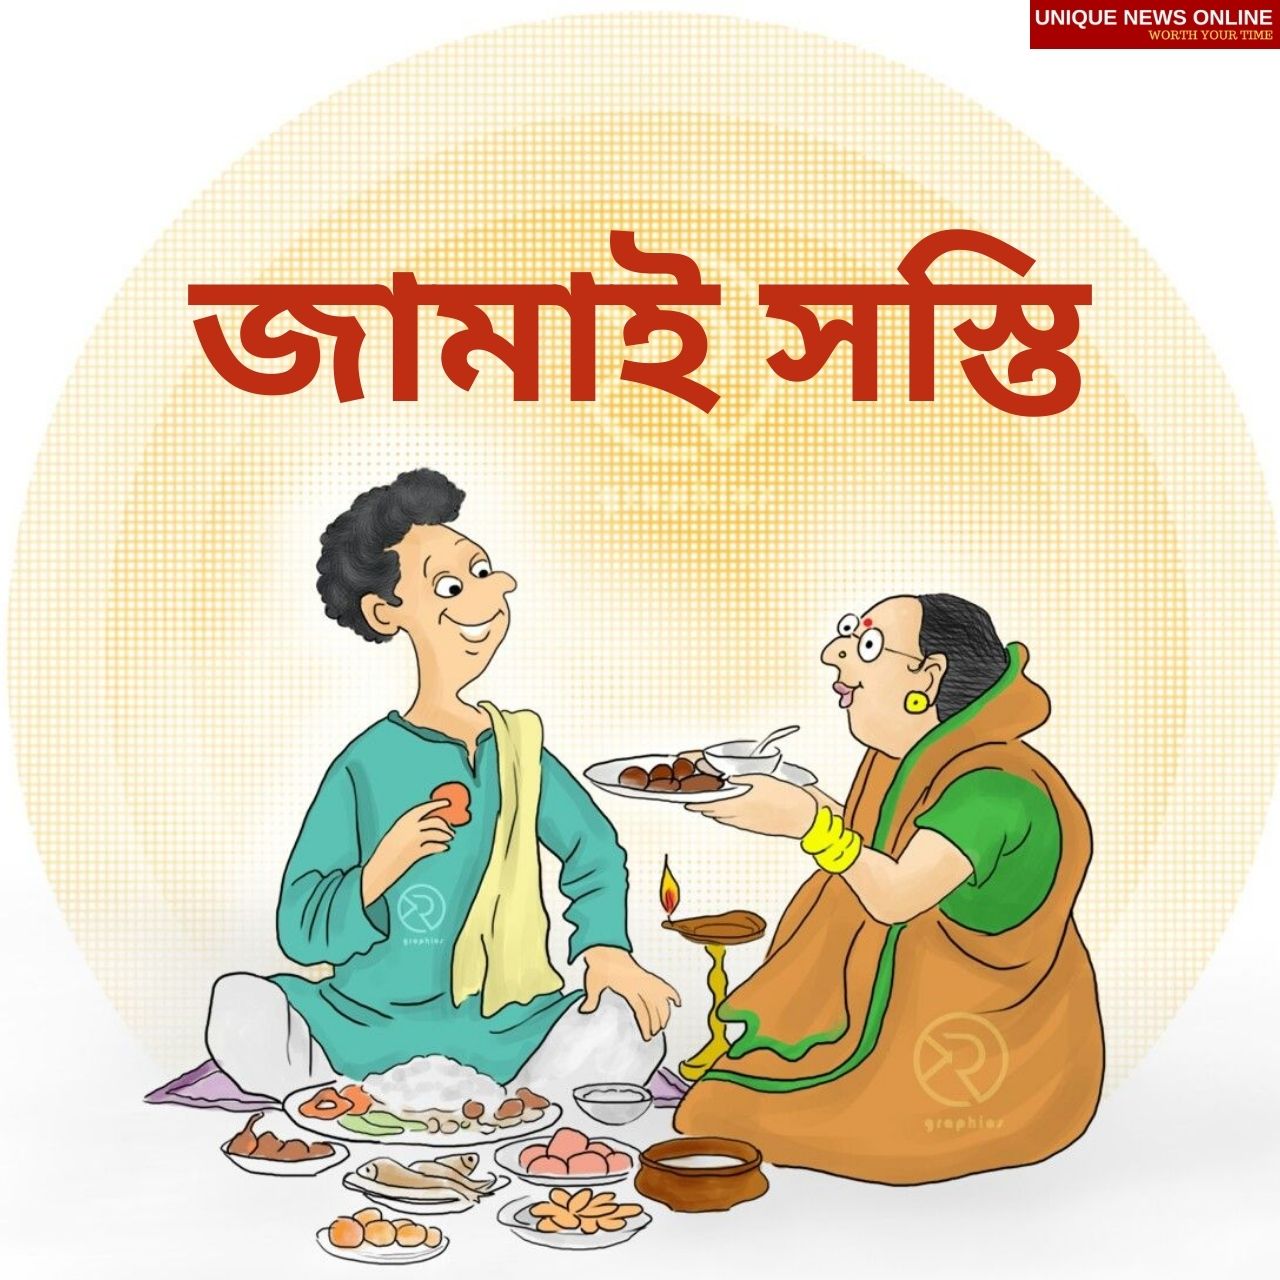 "Jamai Sasthi 2021: English and Bengali Wishes, Image, Greetings, Status, Messages, and Quotes to Share"